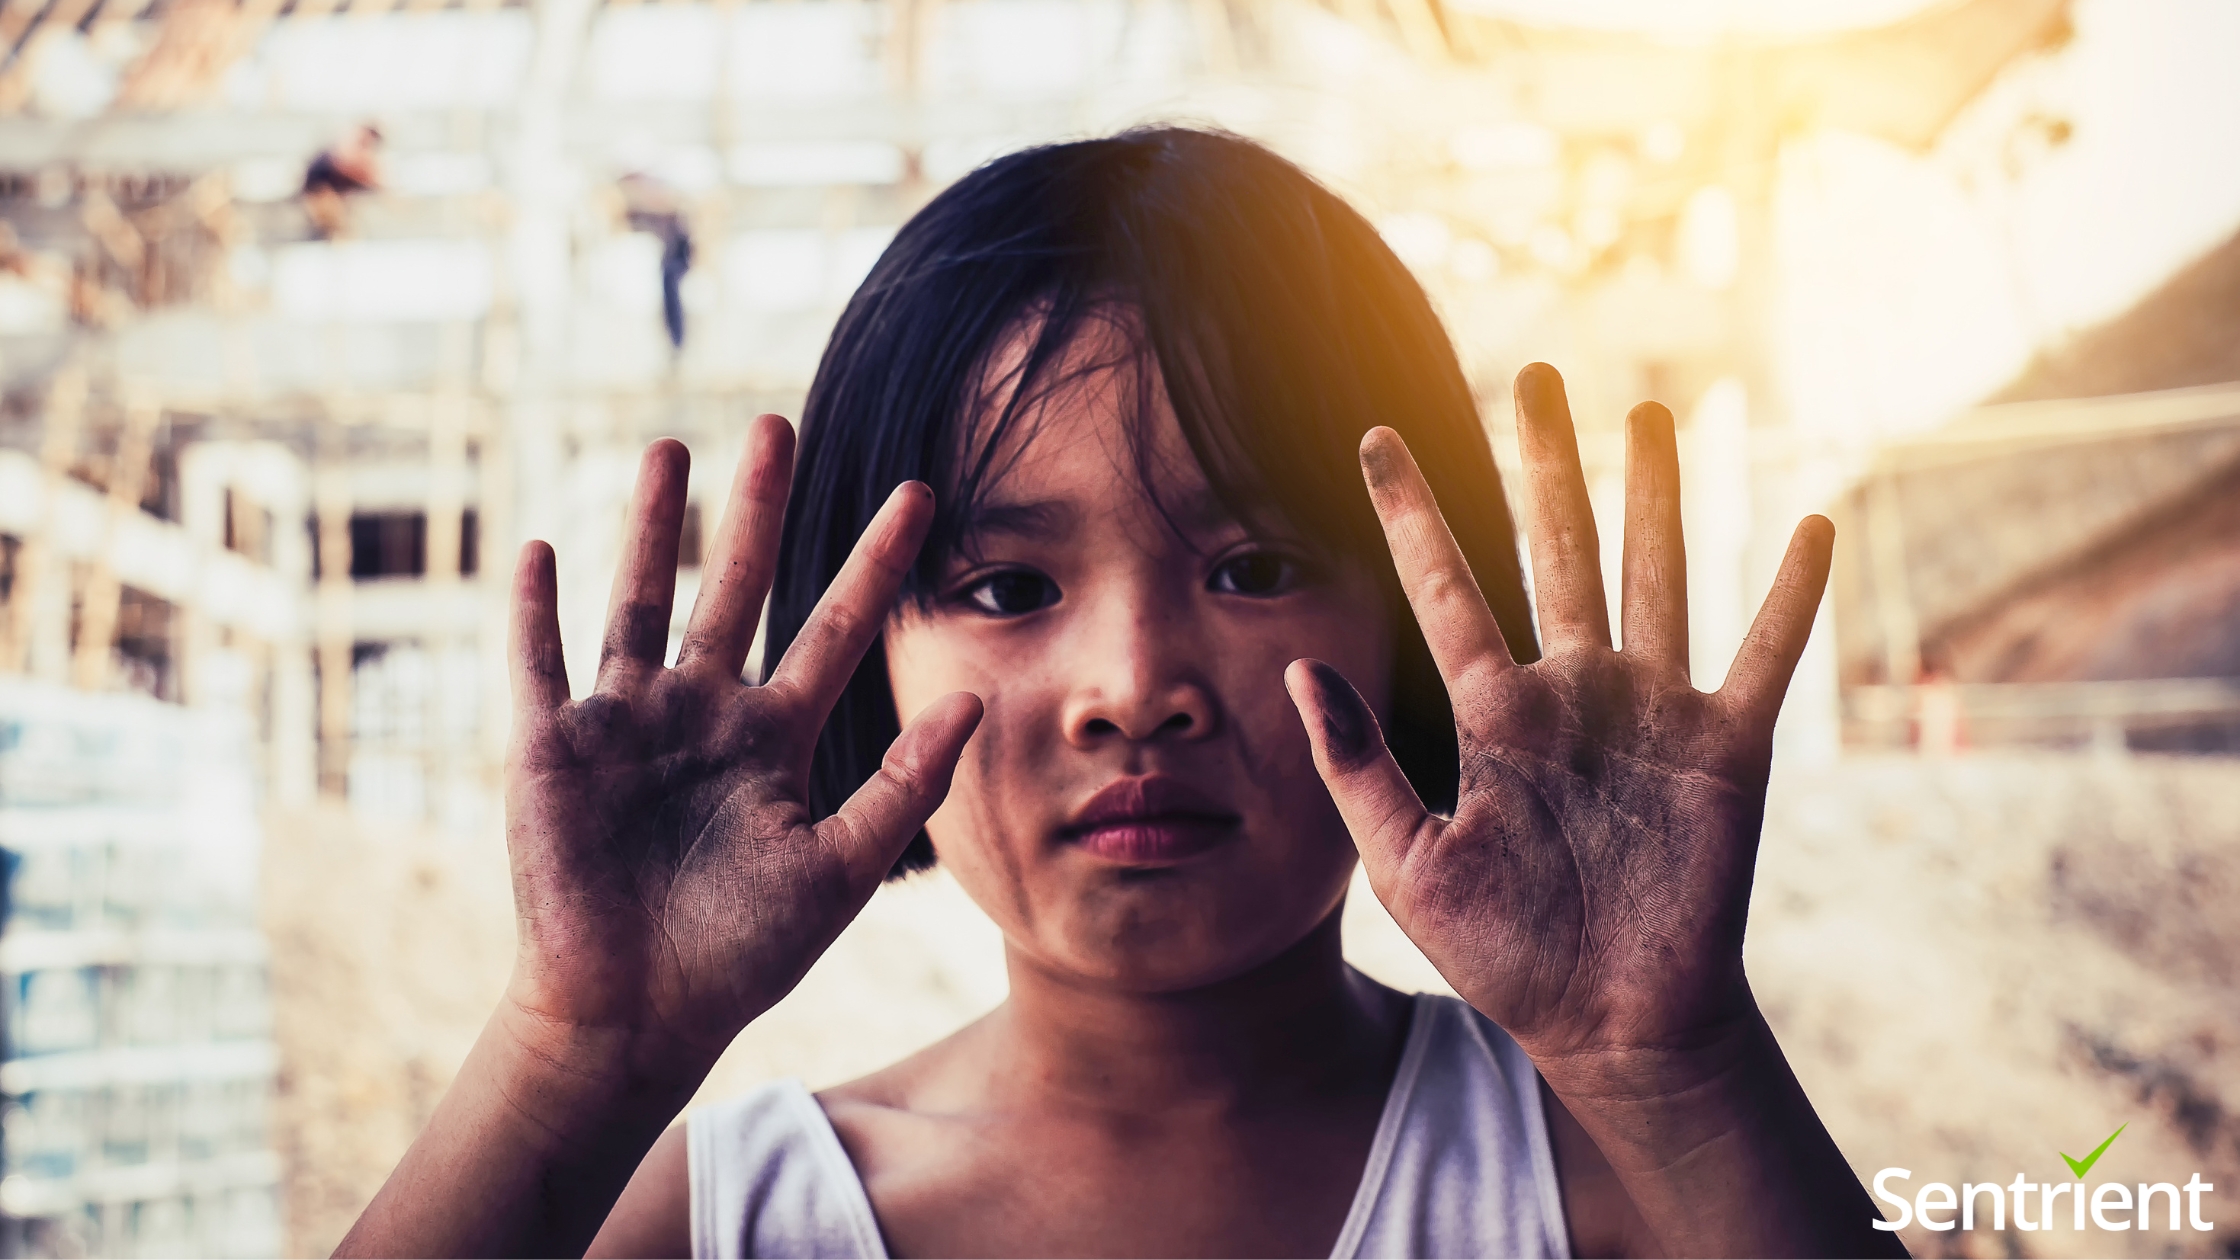 How Can Modern Slavery Training Help Fight The Worst Forms Of Child Labour